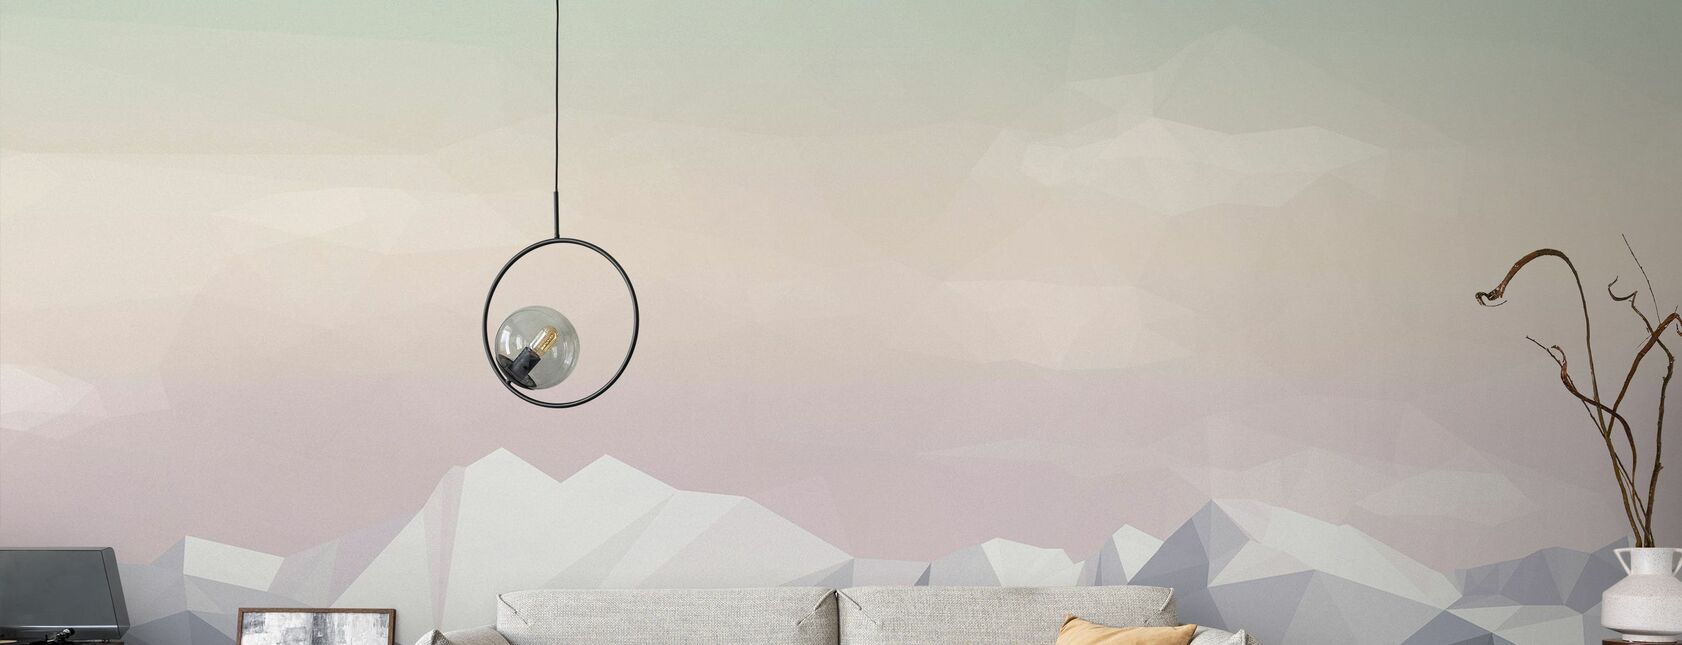 Mostly Mountains Icecream - Wallpaper - Living Room